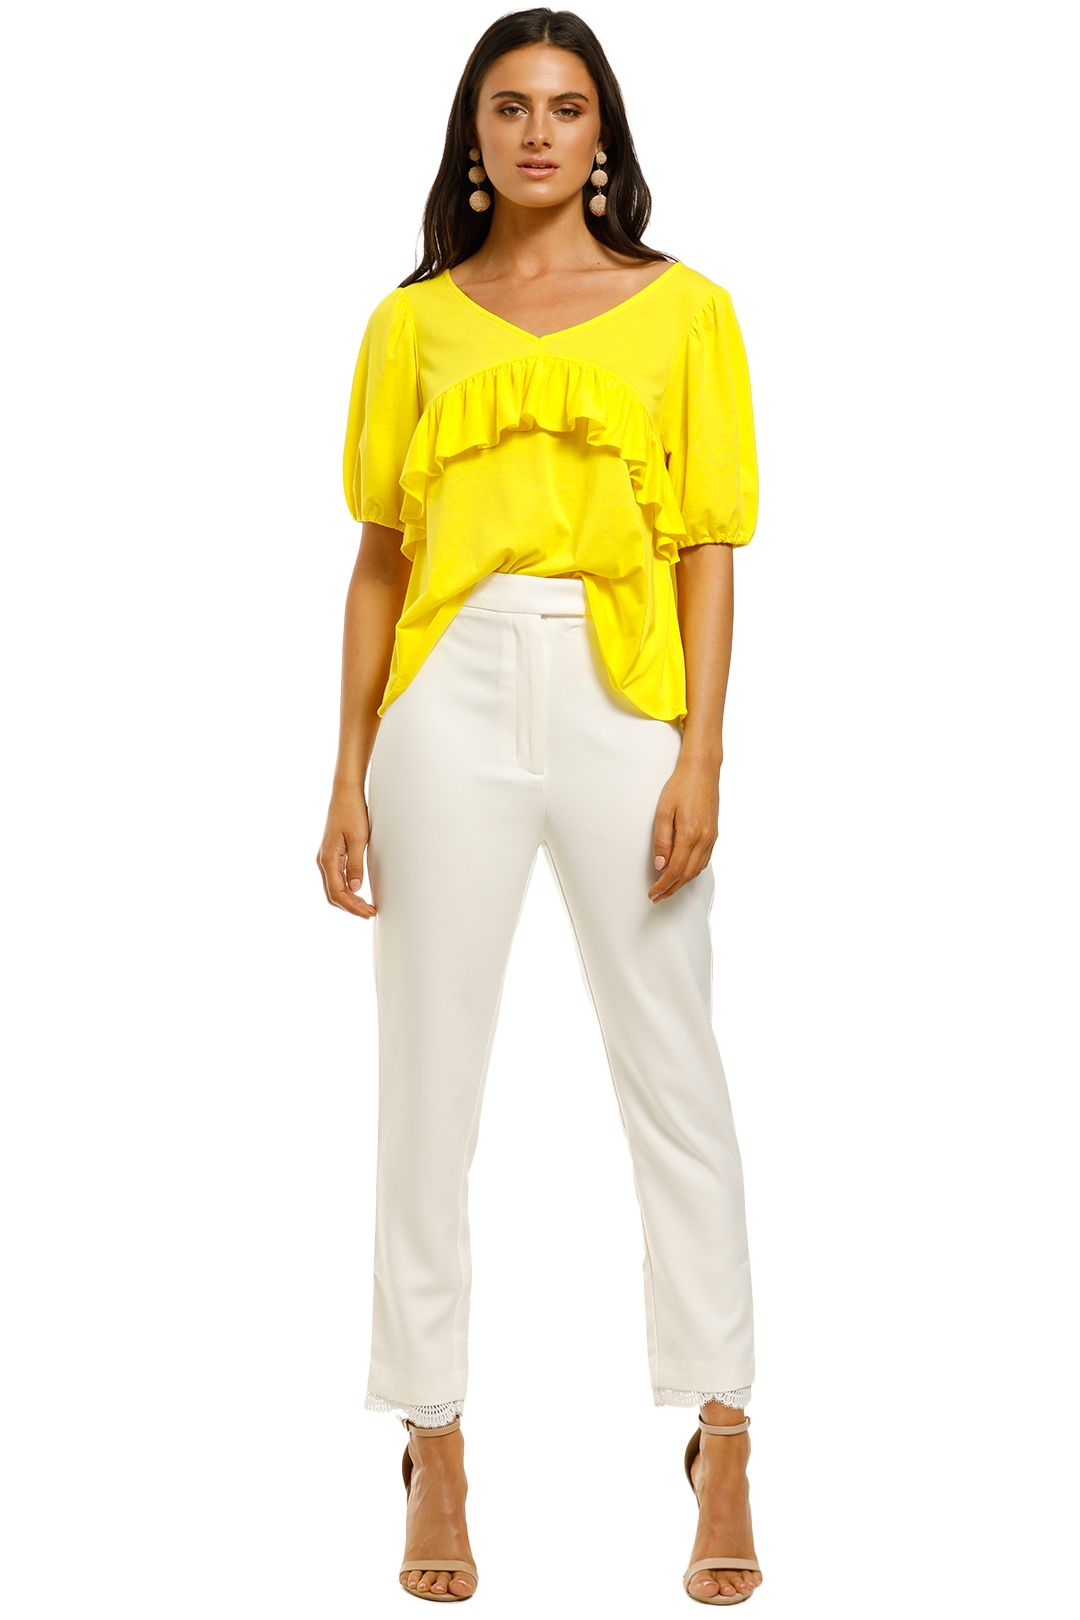 Coop-by-Trelise-Cooper-Frill-Life-Top-Yellow-Front